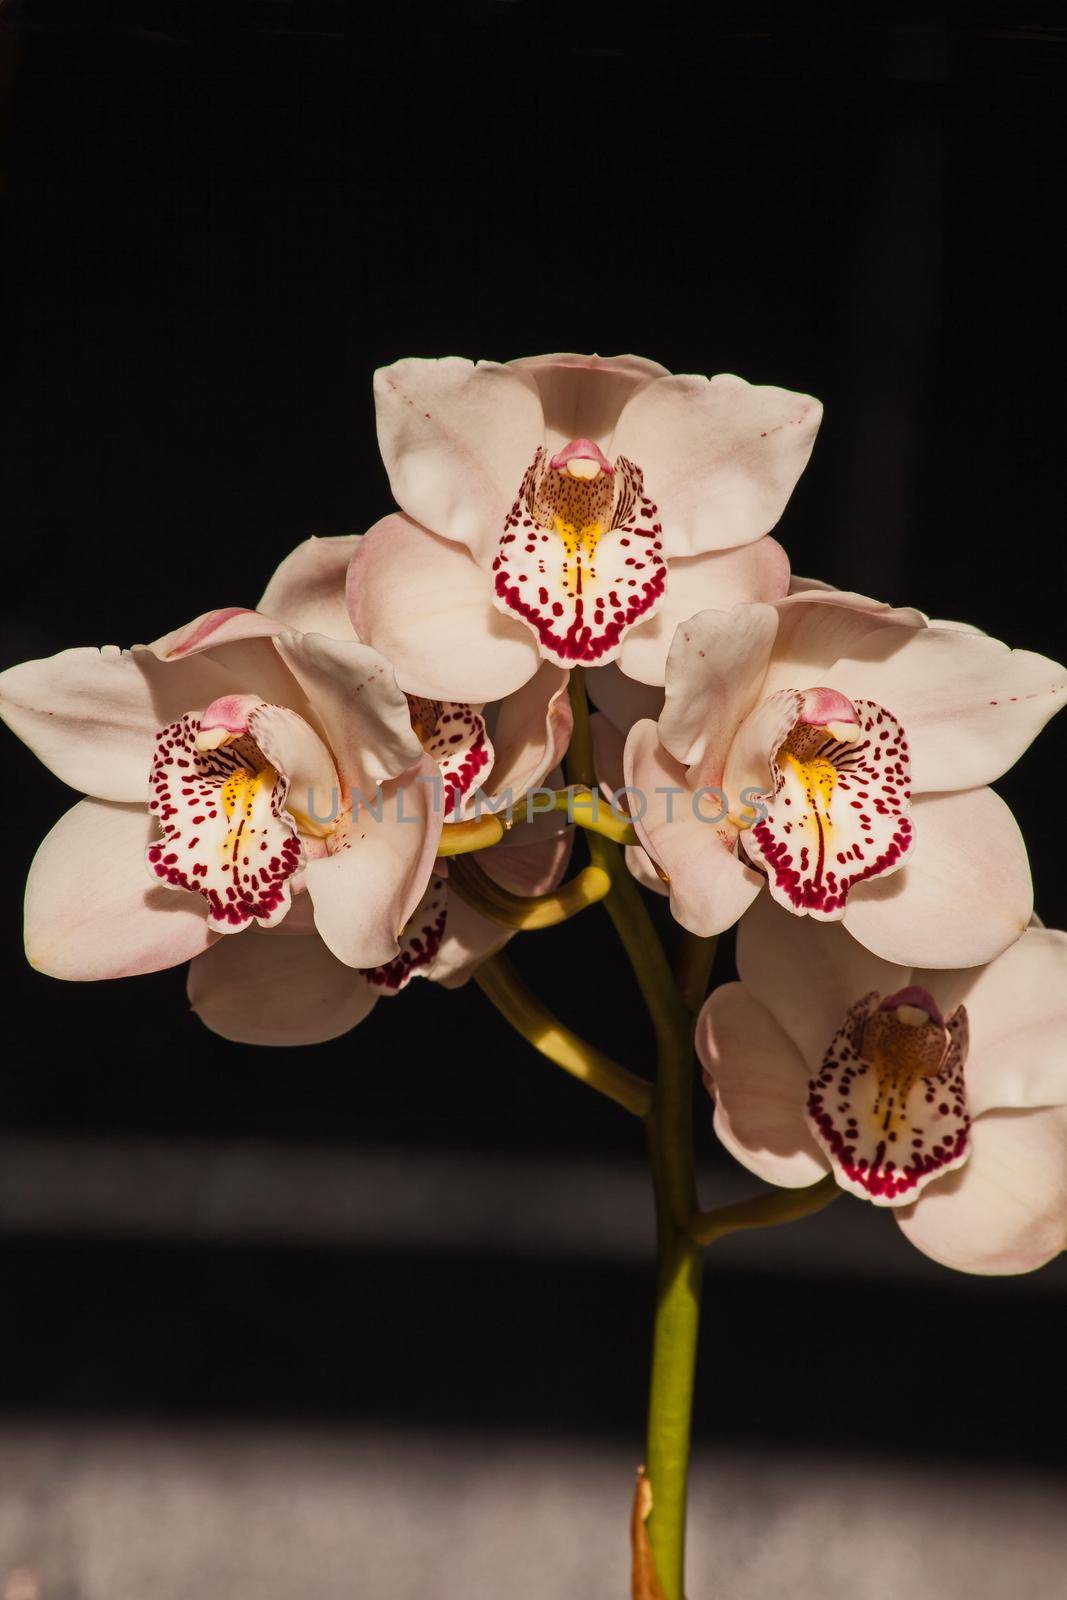 A flower spike of the Cymbidium Orchid on a black background